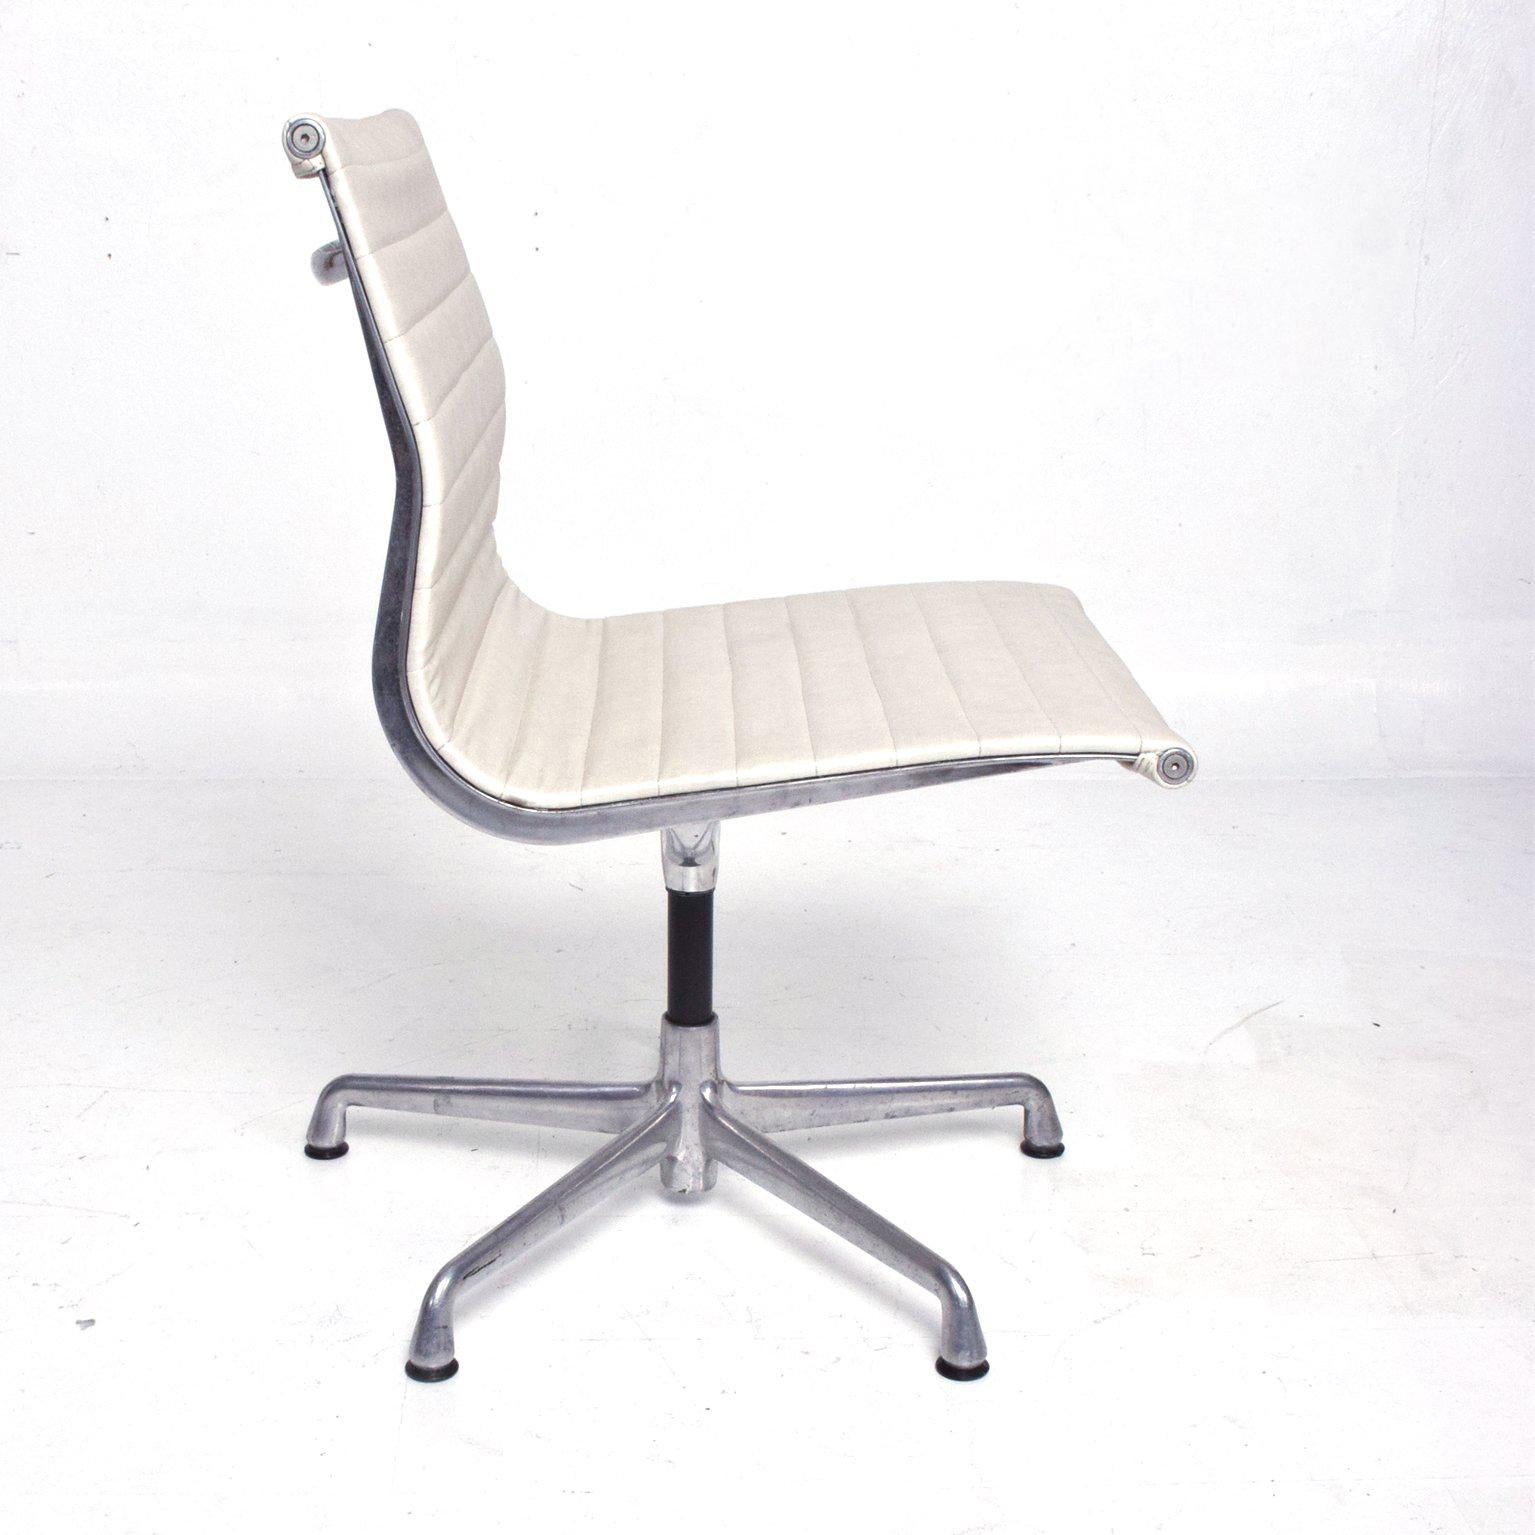 Early Aluminum Group Herman Miller Eames Chairs with Five-Star Base 1